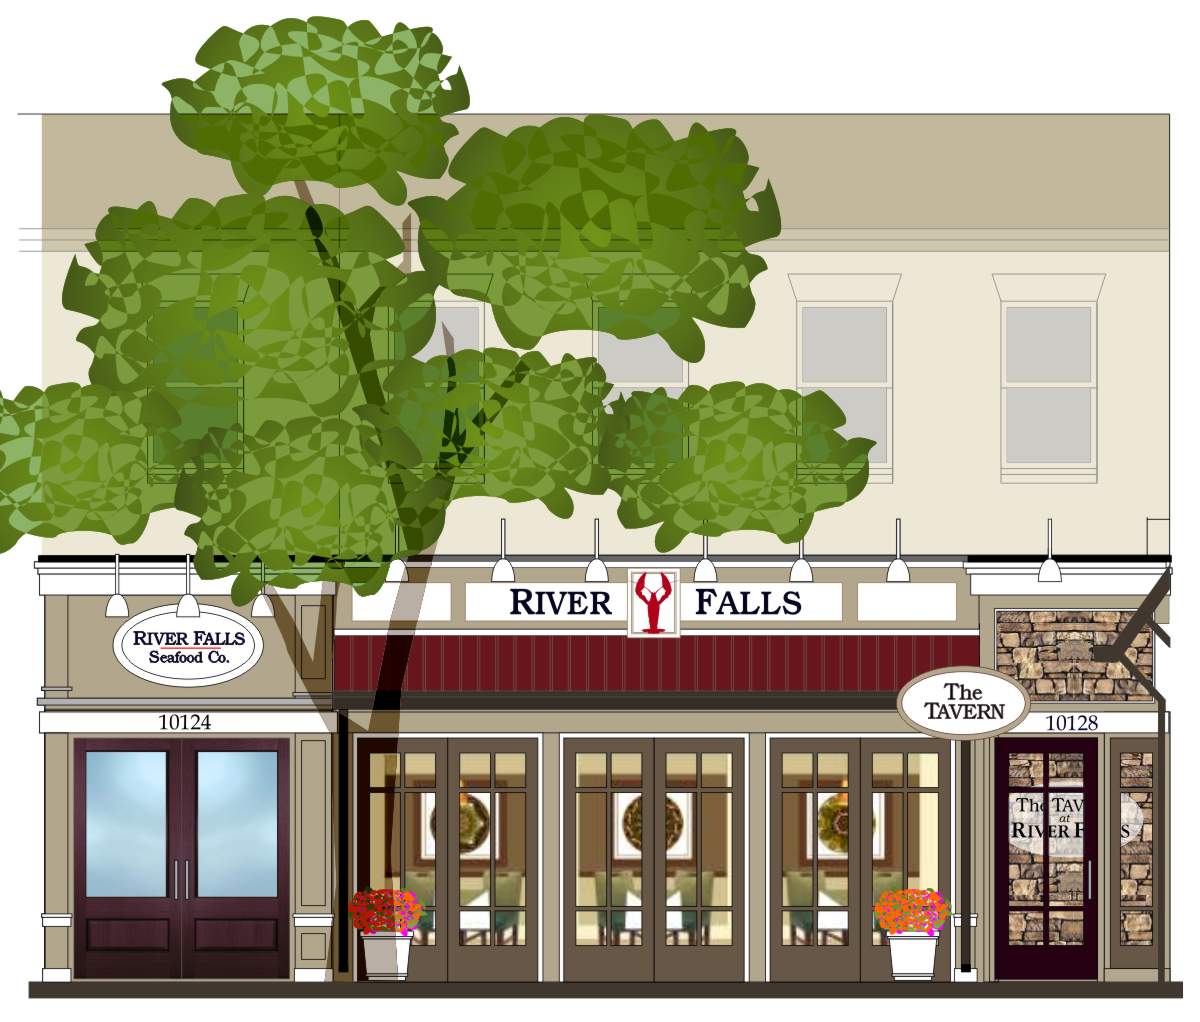 Elevation rendering of the Tavern at River Falls restaurant facade with wine colored standing seam roof, full height french door multi pane glass doors leading to dining patio and array of restaurant and next door Market signage compatibility by Mark Ksiazewski at Centre Street Creative